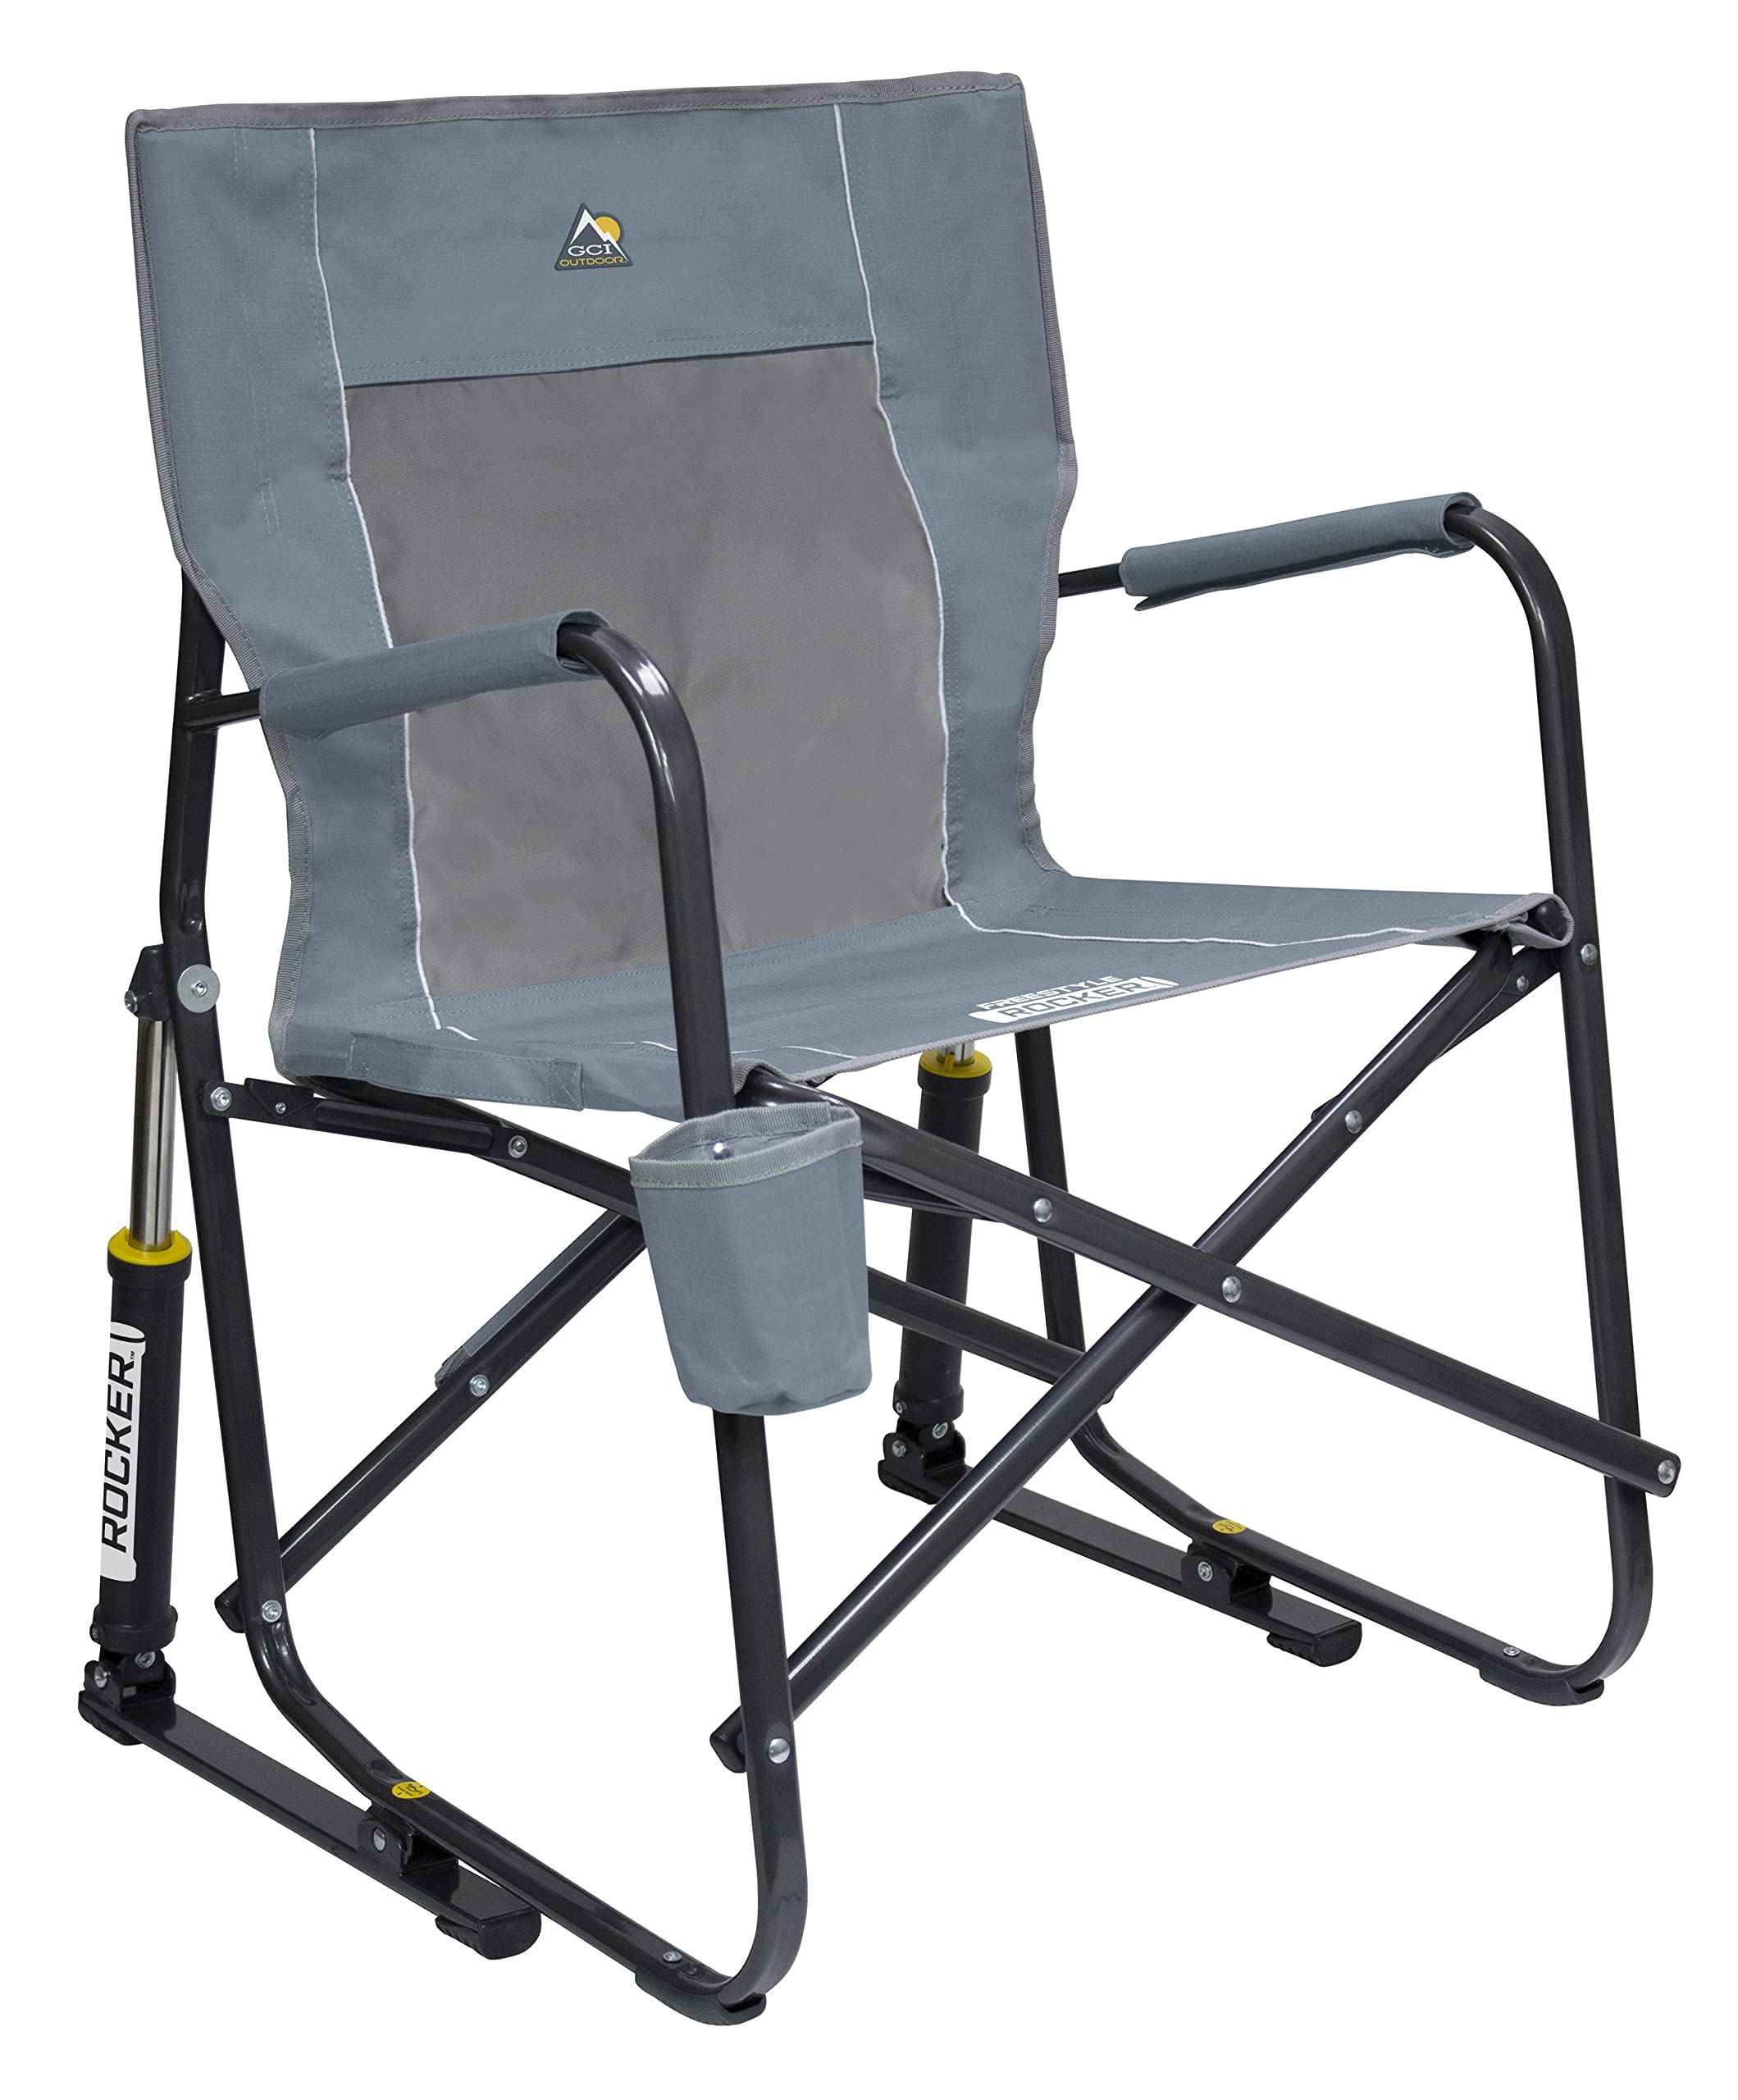 GCI Outdoor Freestyle Rocker Portable Rocking Chair & Outdoor Camping Chair, Mercury